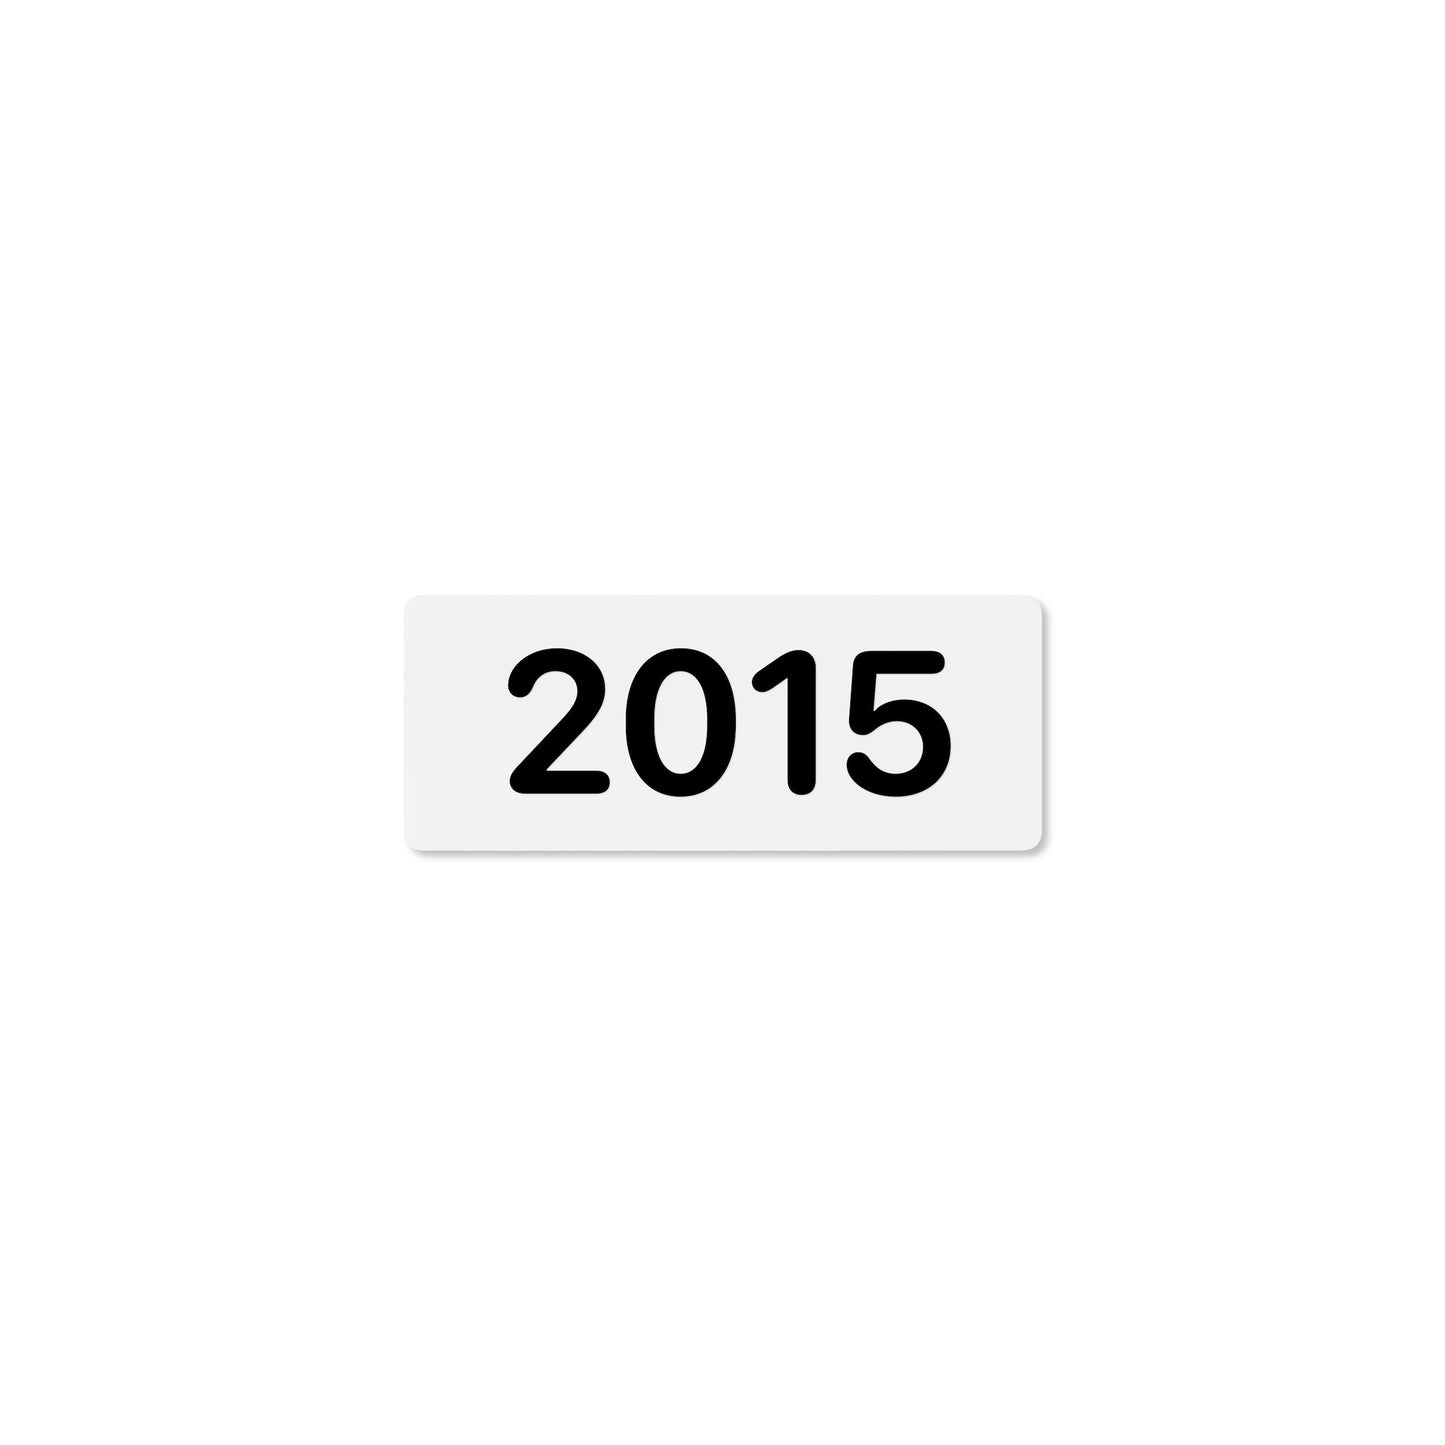 Numeral 2015